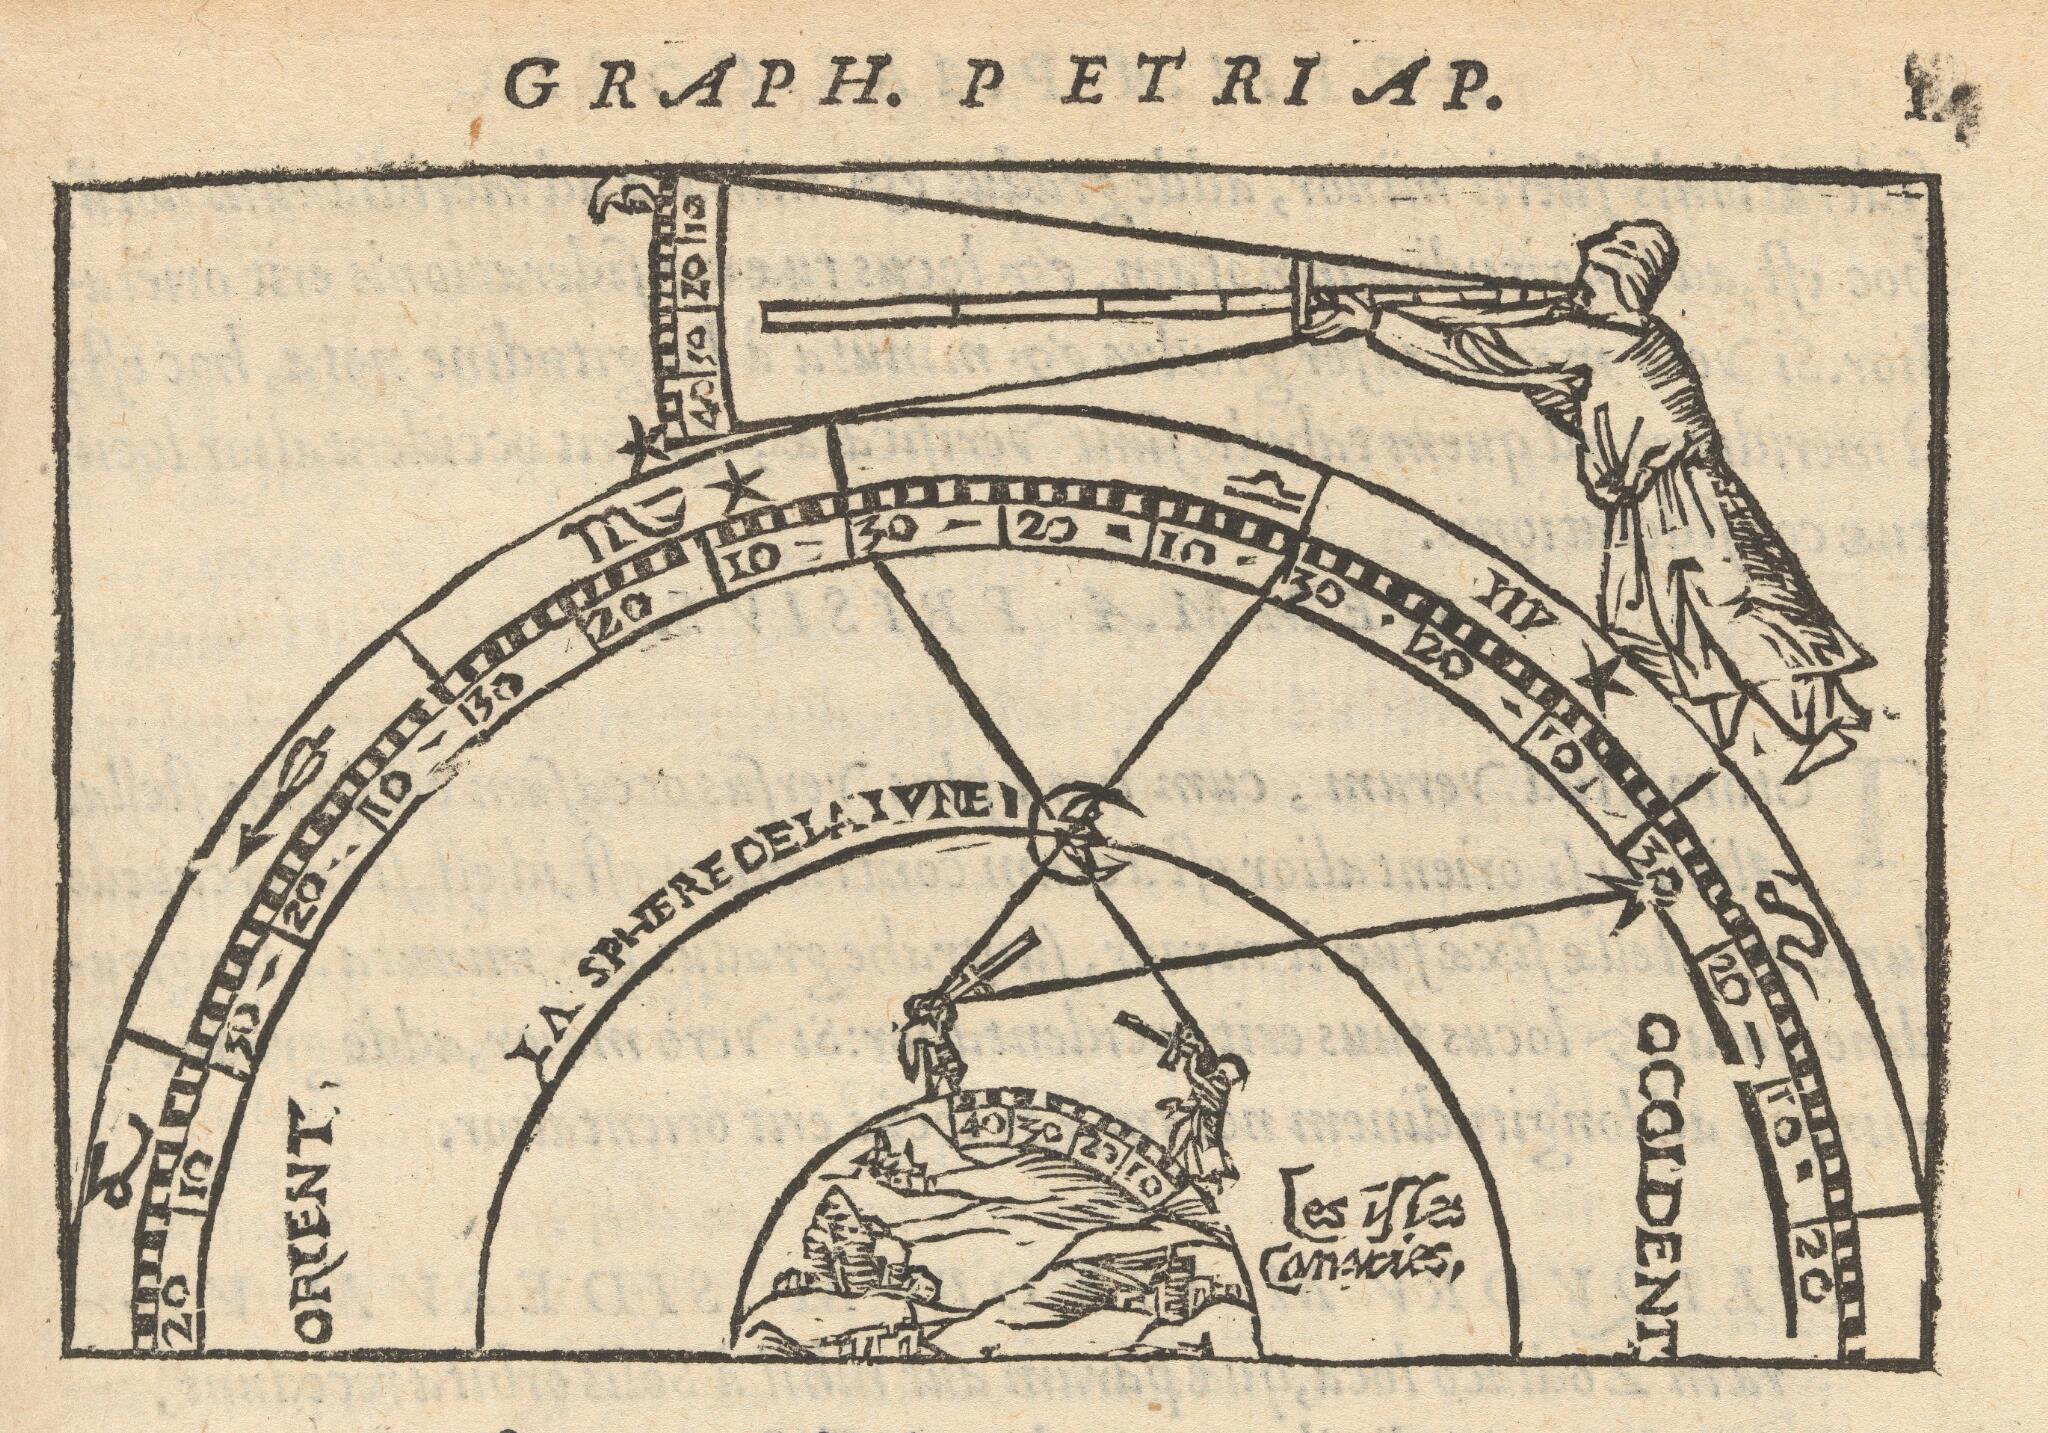 Lunar-distance method A depiction of the lunar-distance method, in which a figure measures the angle formed by the moon and a star using a cross staff. Peter Apian, 1551.